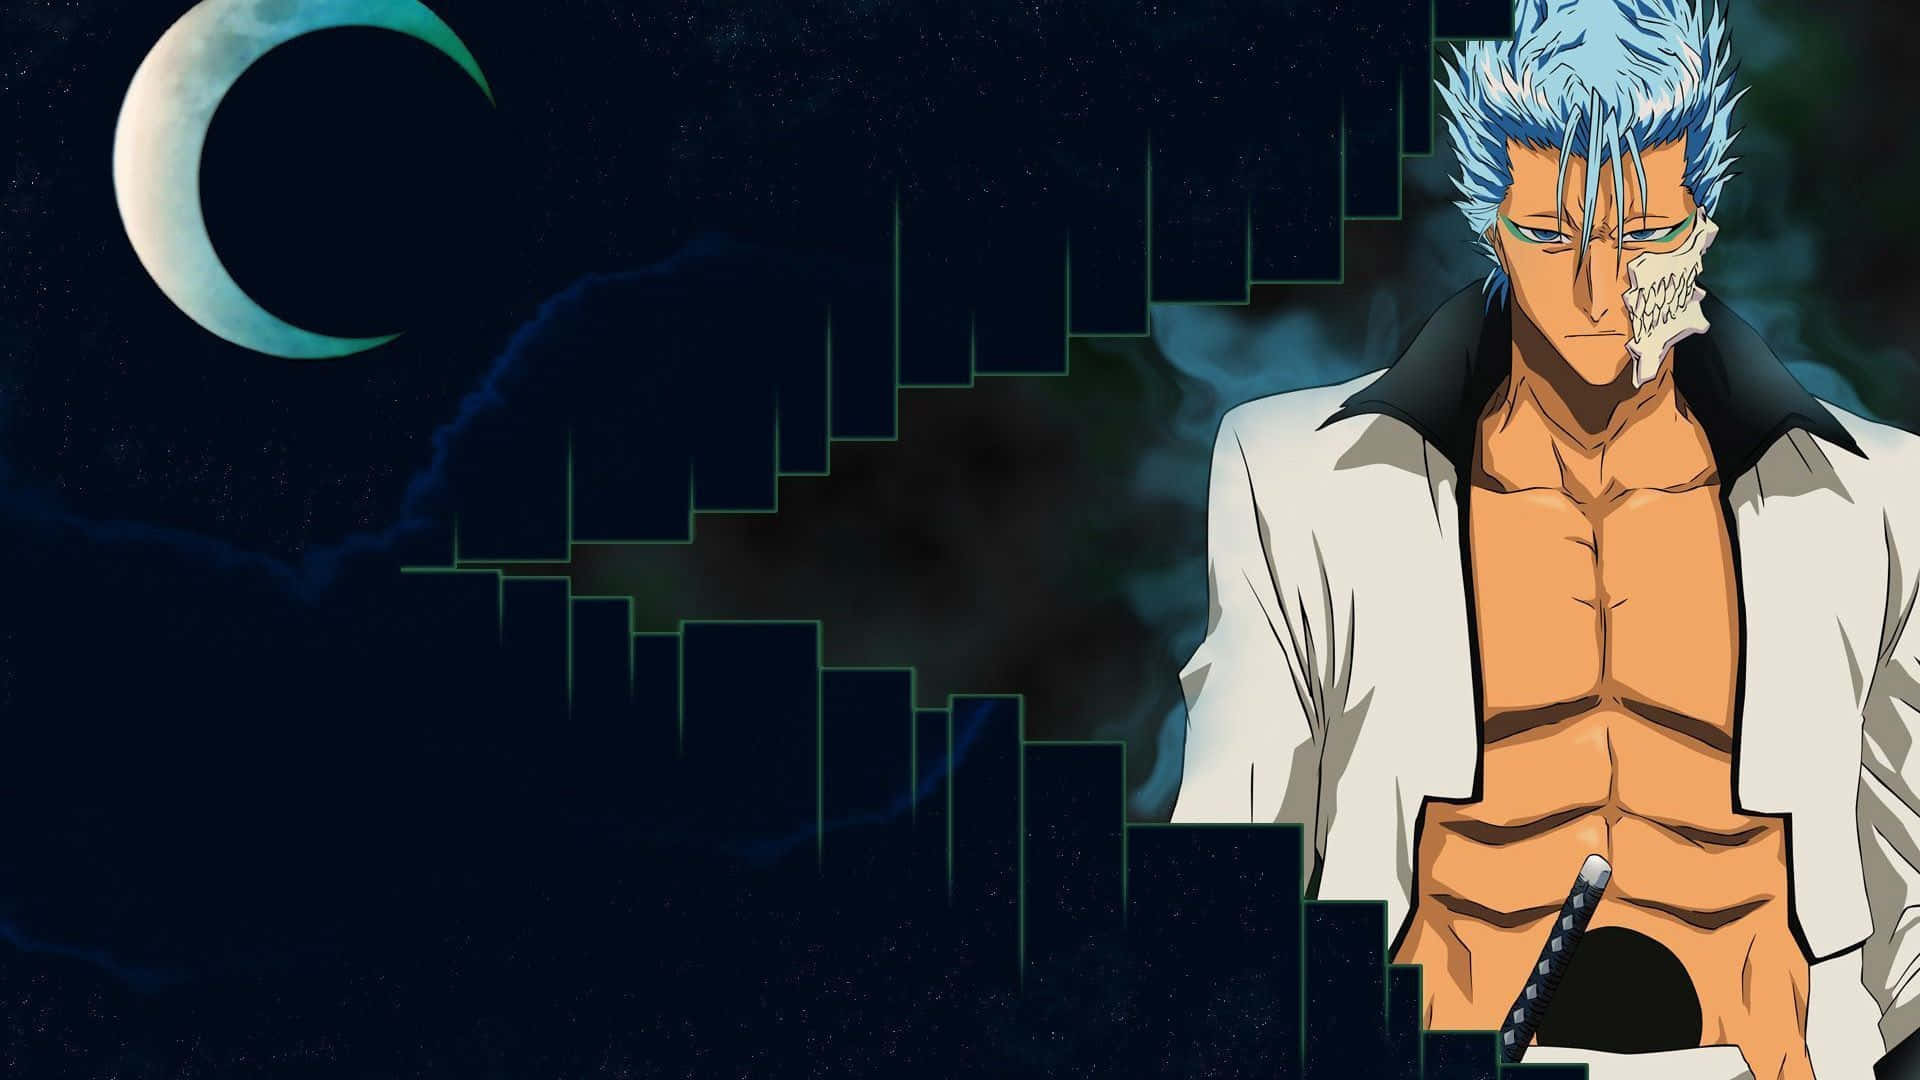 Grimmjow Jaegerjaquez in his iconic iconic outfit Wallpaper